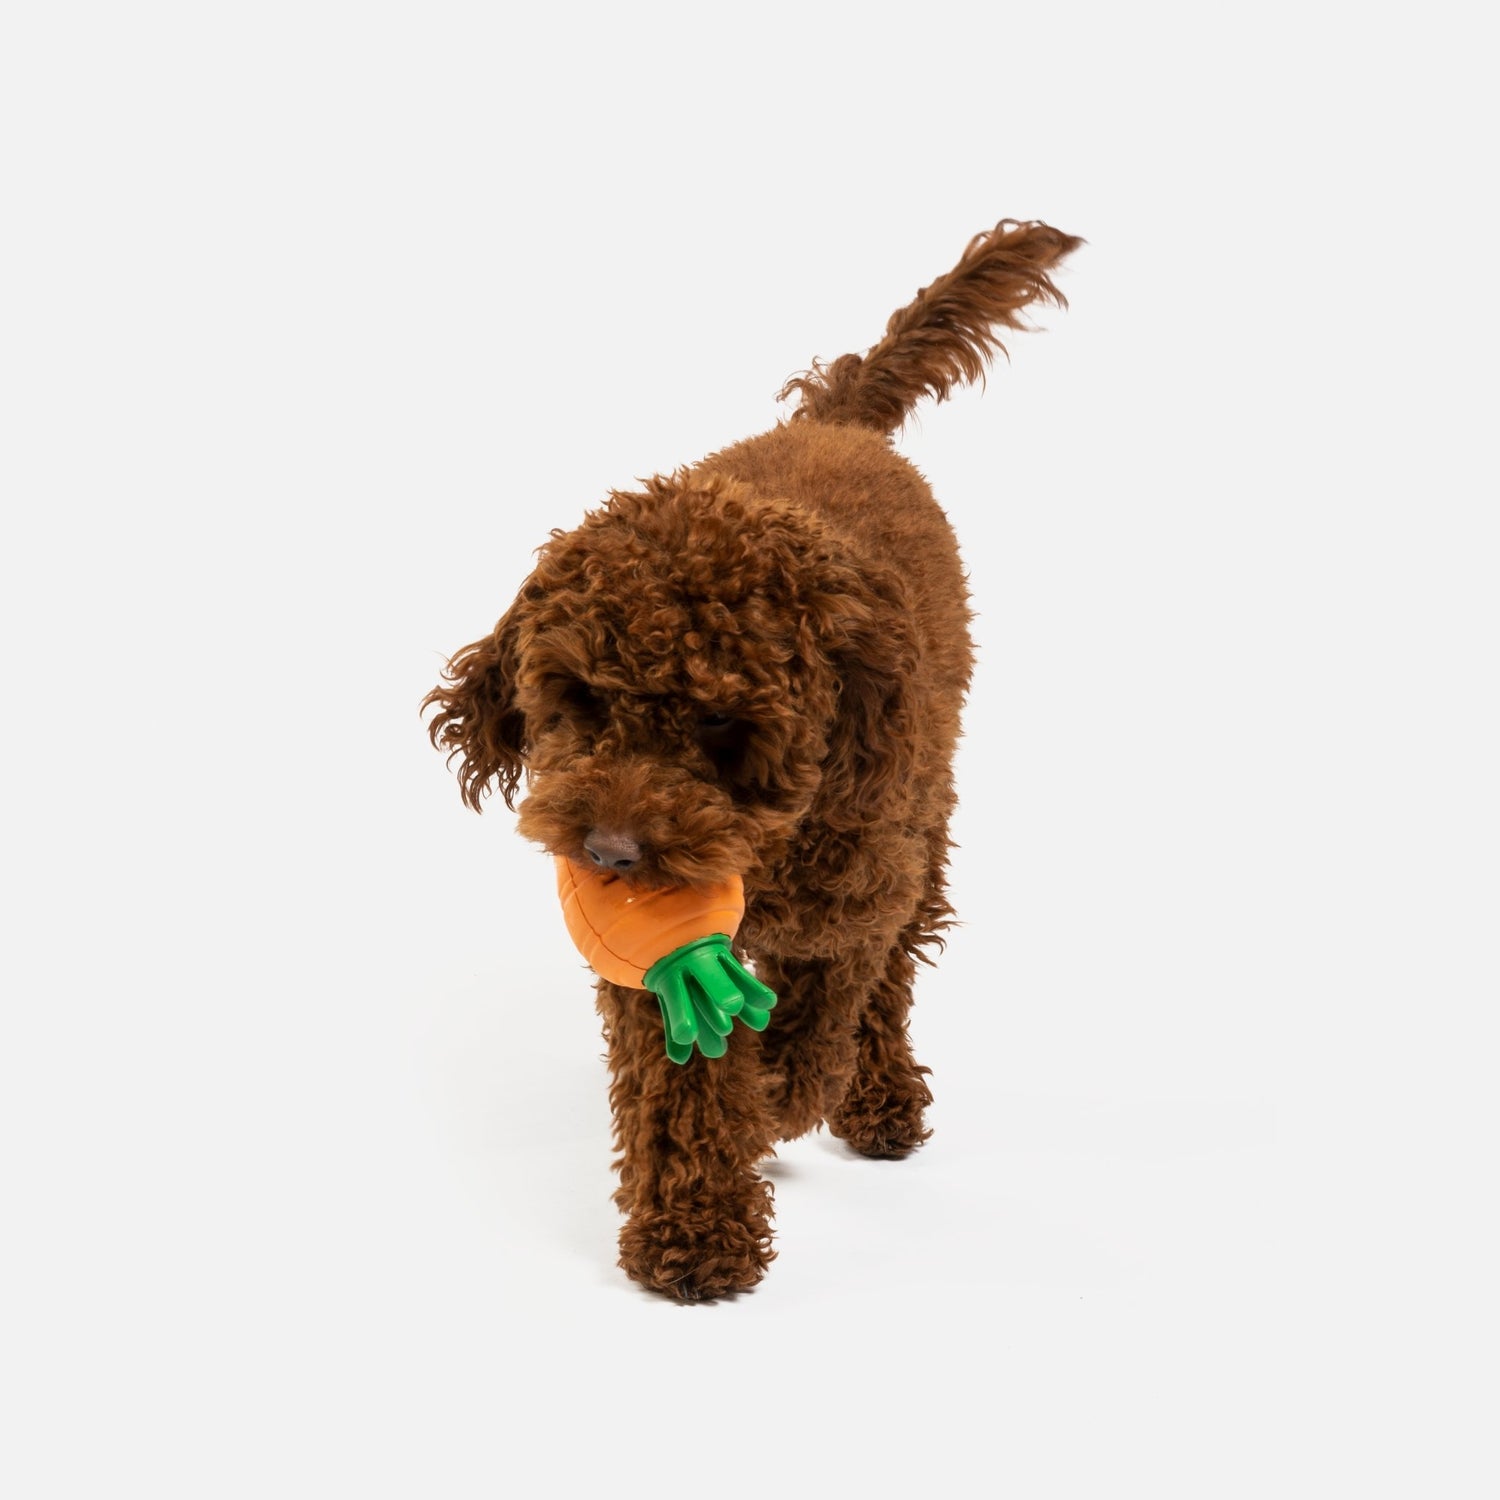 Dog In Drip Newest Interactive Pet Toy — Carrot Farm – Dog in Drip